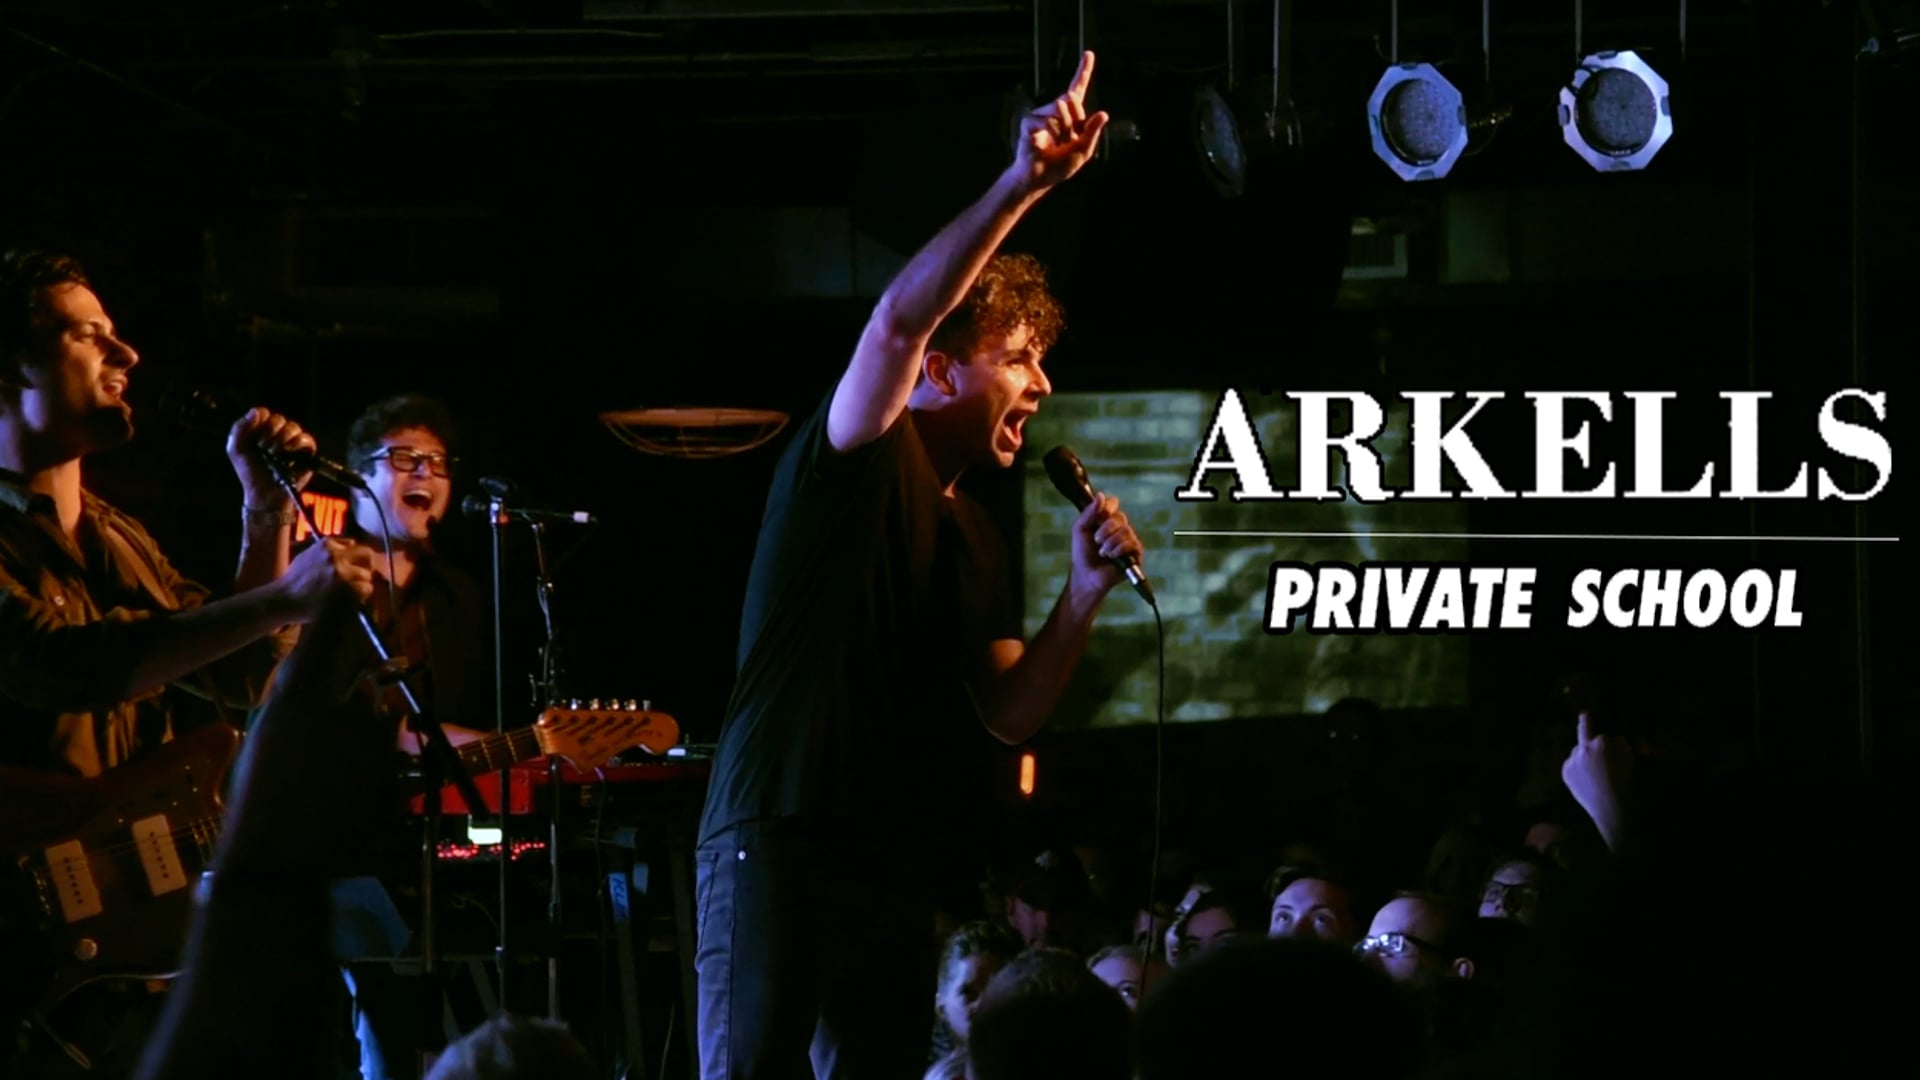 Arkells - Private School (Live @ Commonwealth Bar & Stage in Calgary, AB)